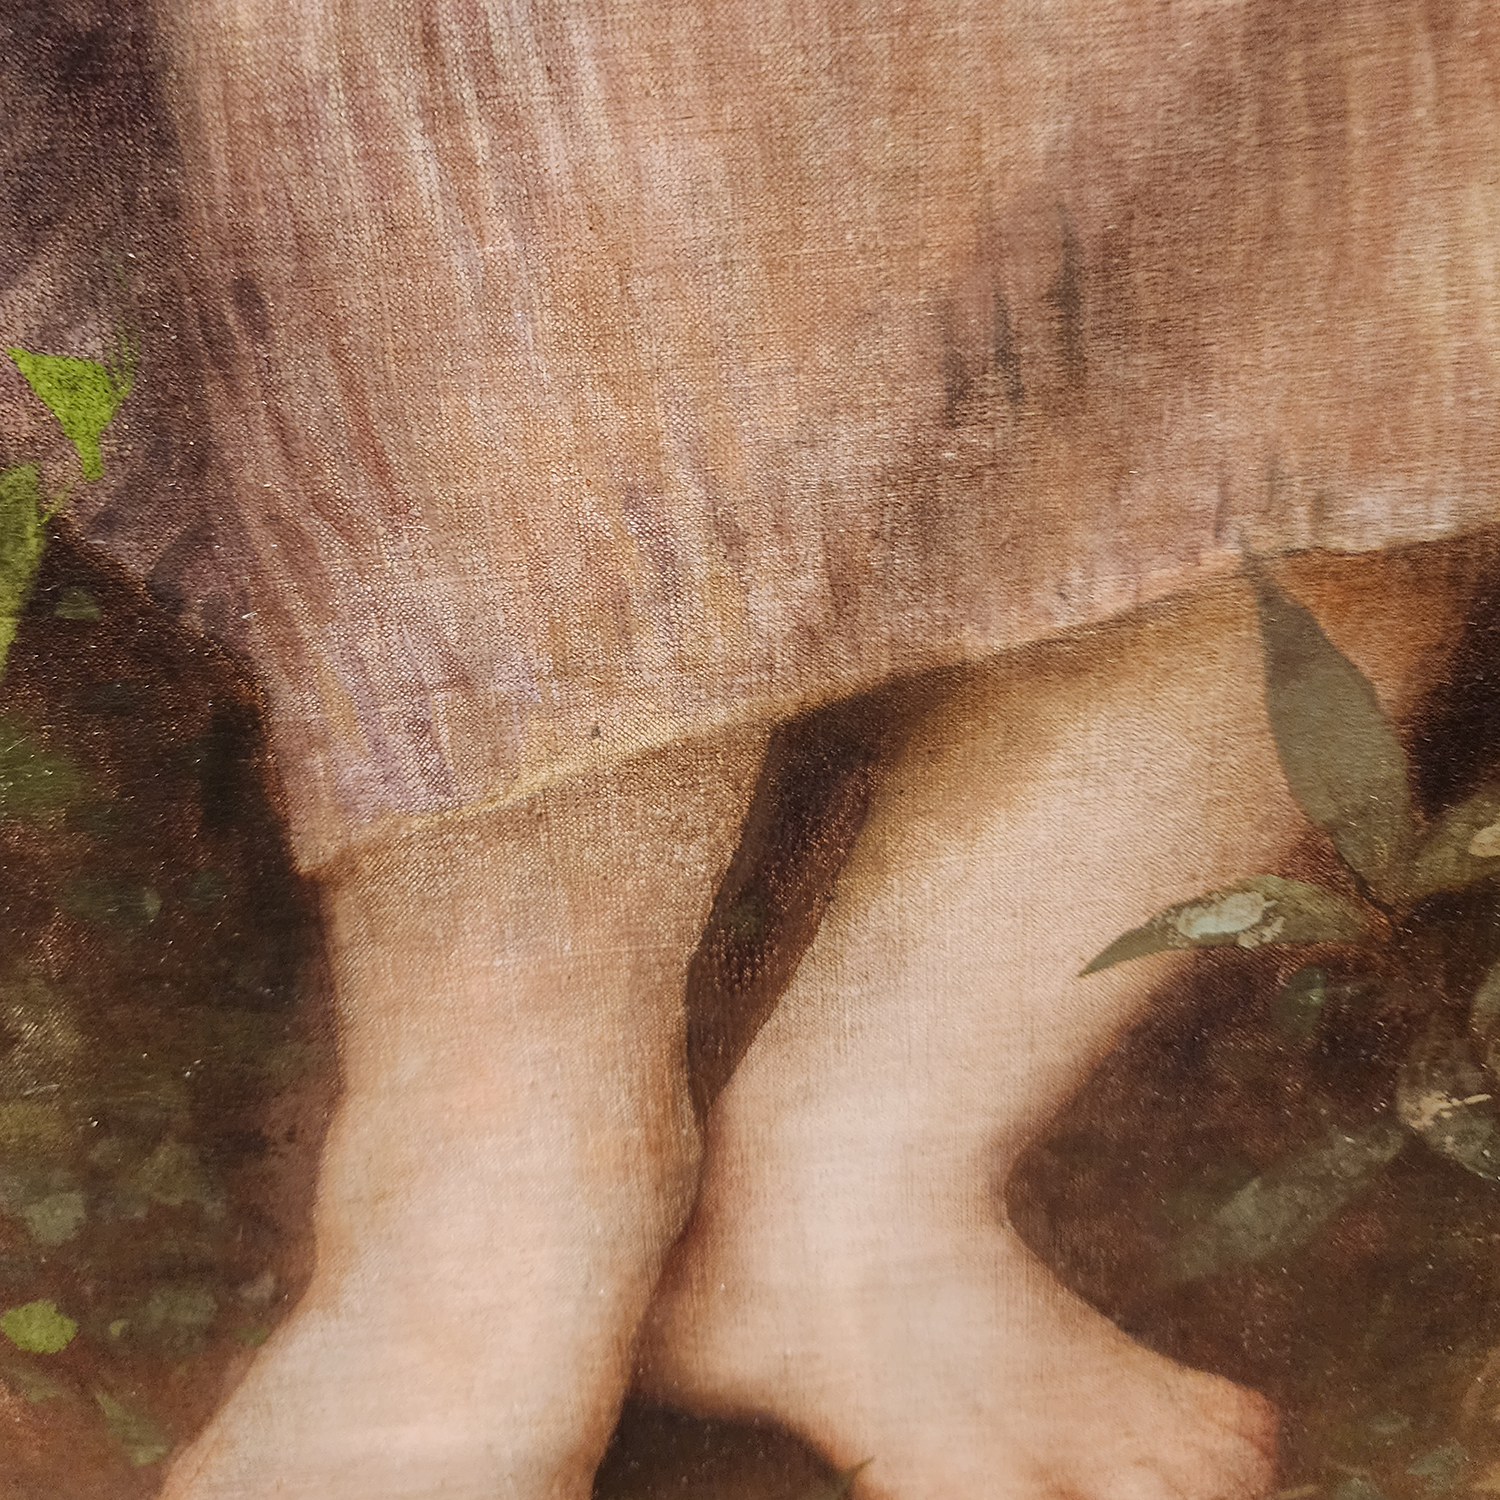 detail of the girl's feet in the Perrault painting